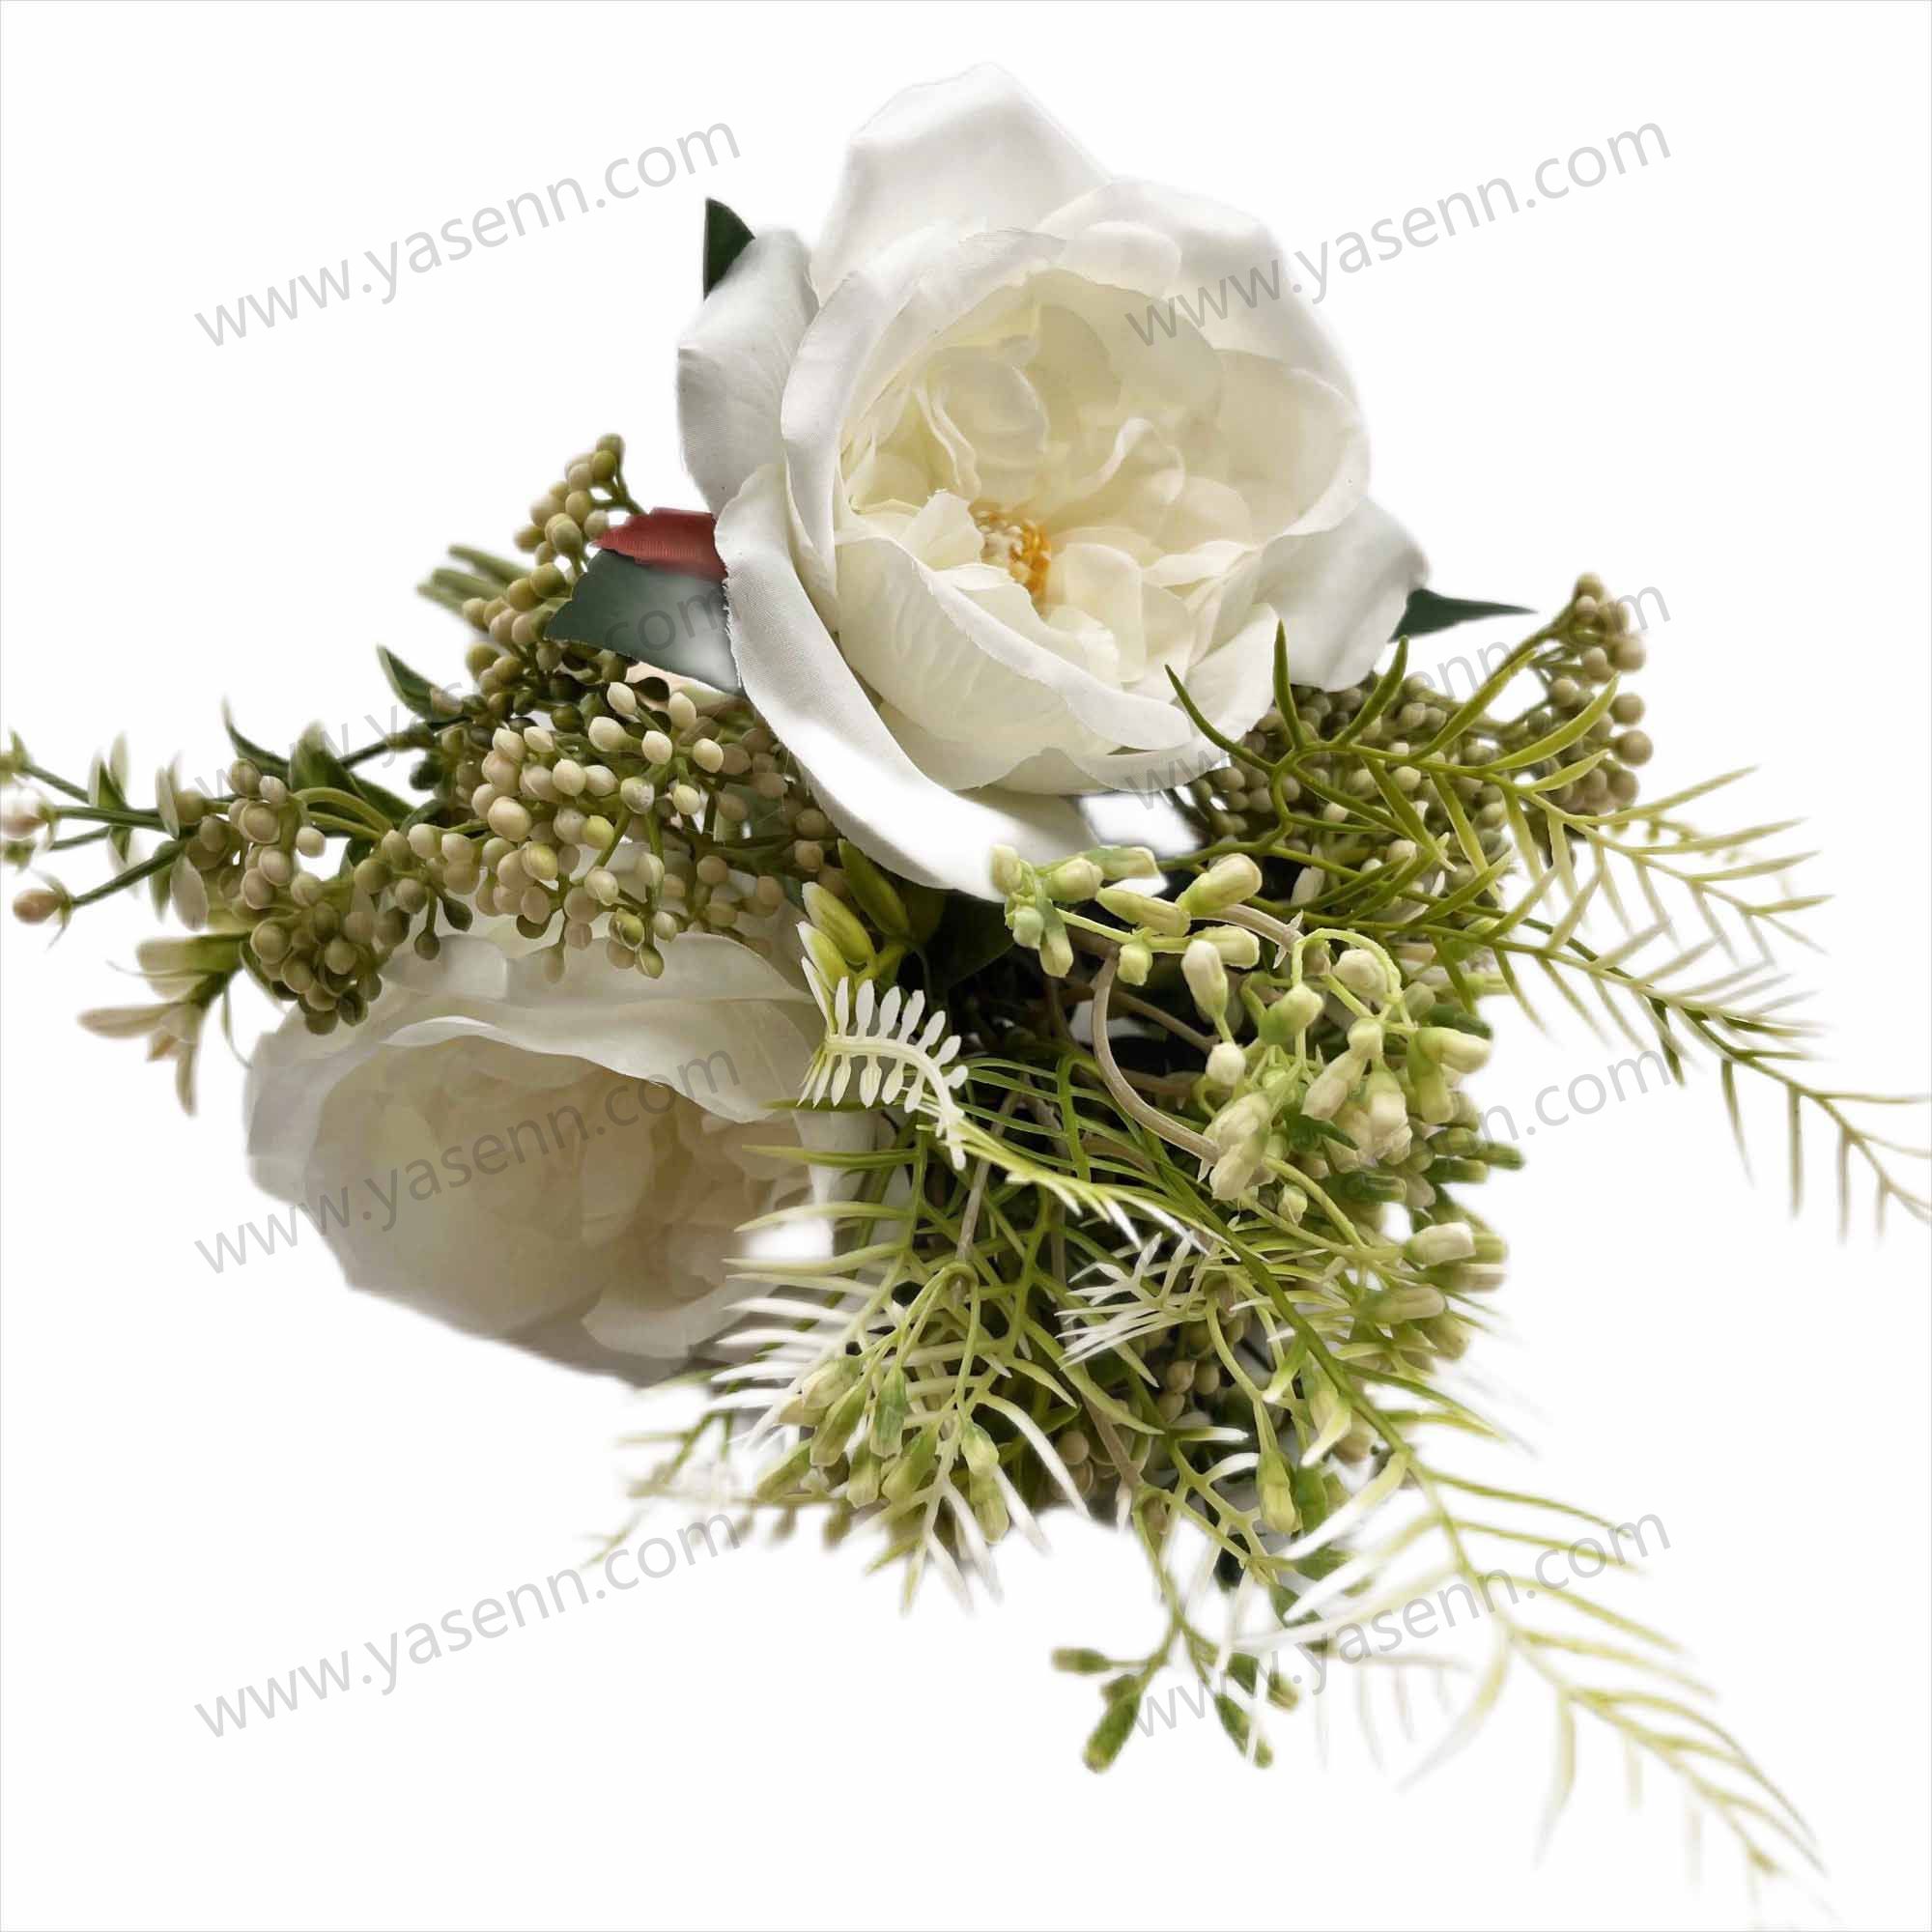 7 BRANCHES PEONY bridal bouquet artificial flowers YSB23176